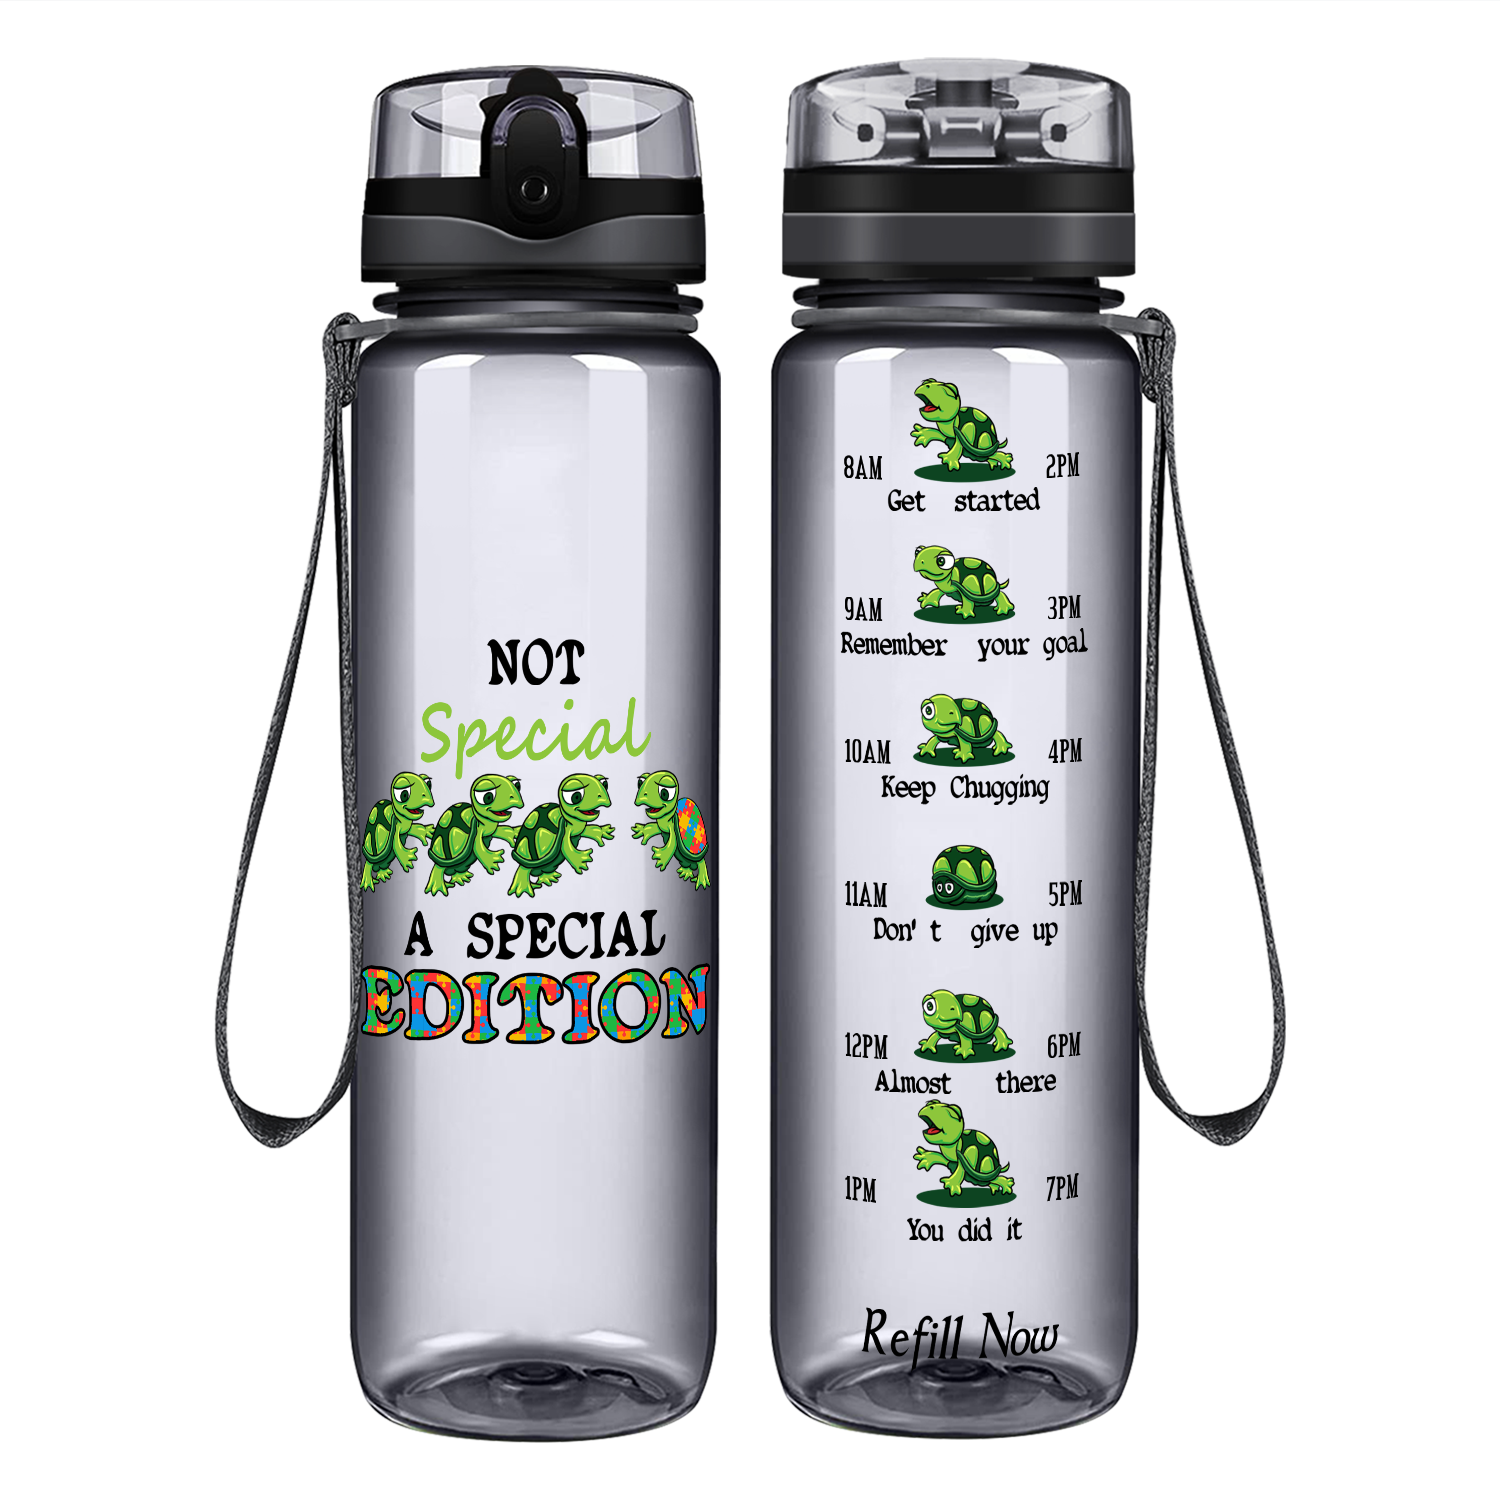 Not Special, A Special Edition Motivational Tracking Water Bottle